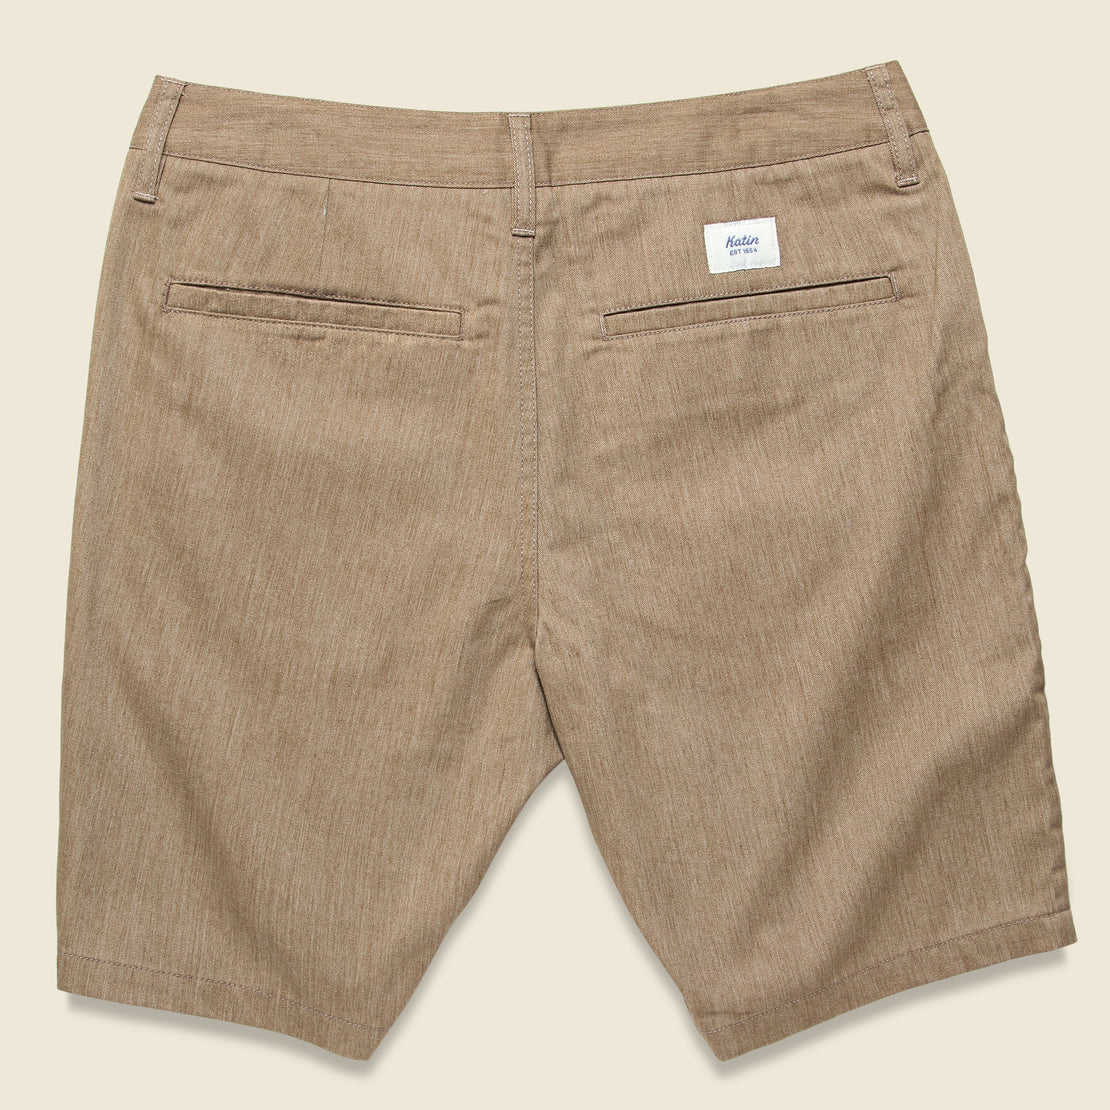 Court Short - Coffee - Katin - STAG Provisions - Shorts - Solid